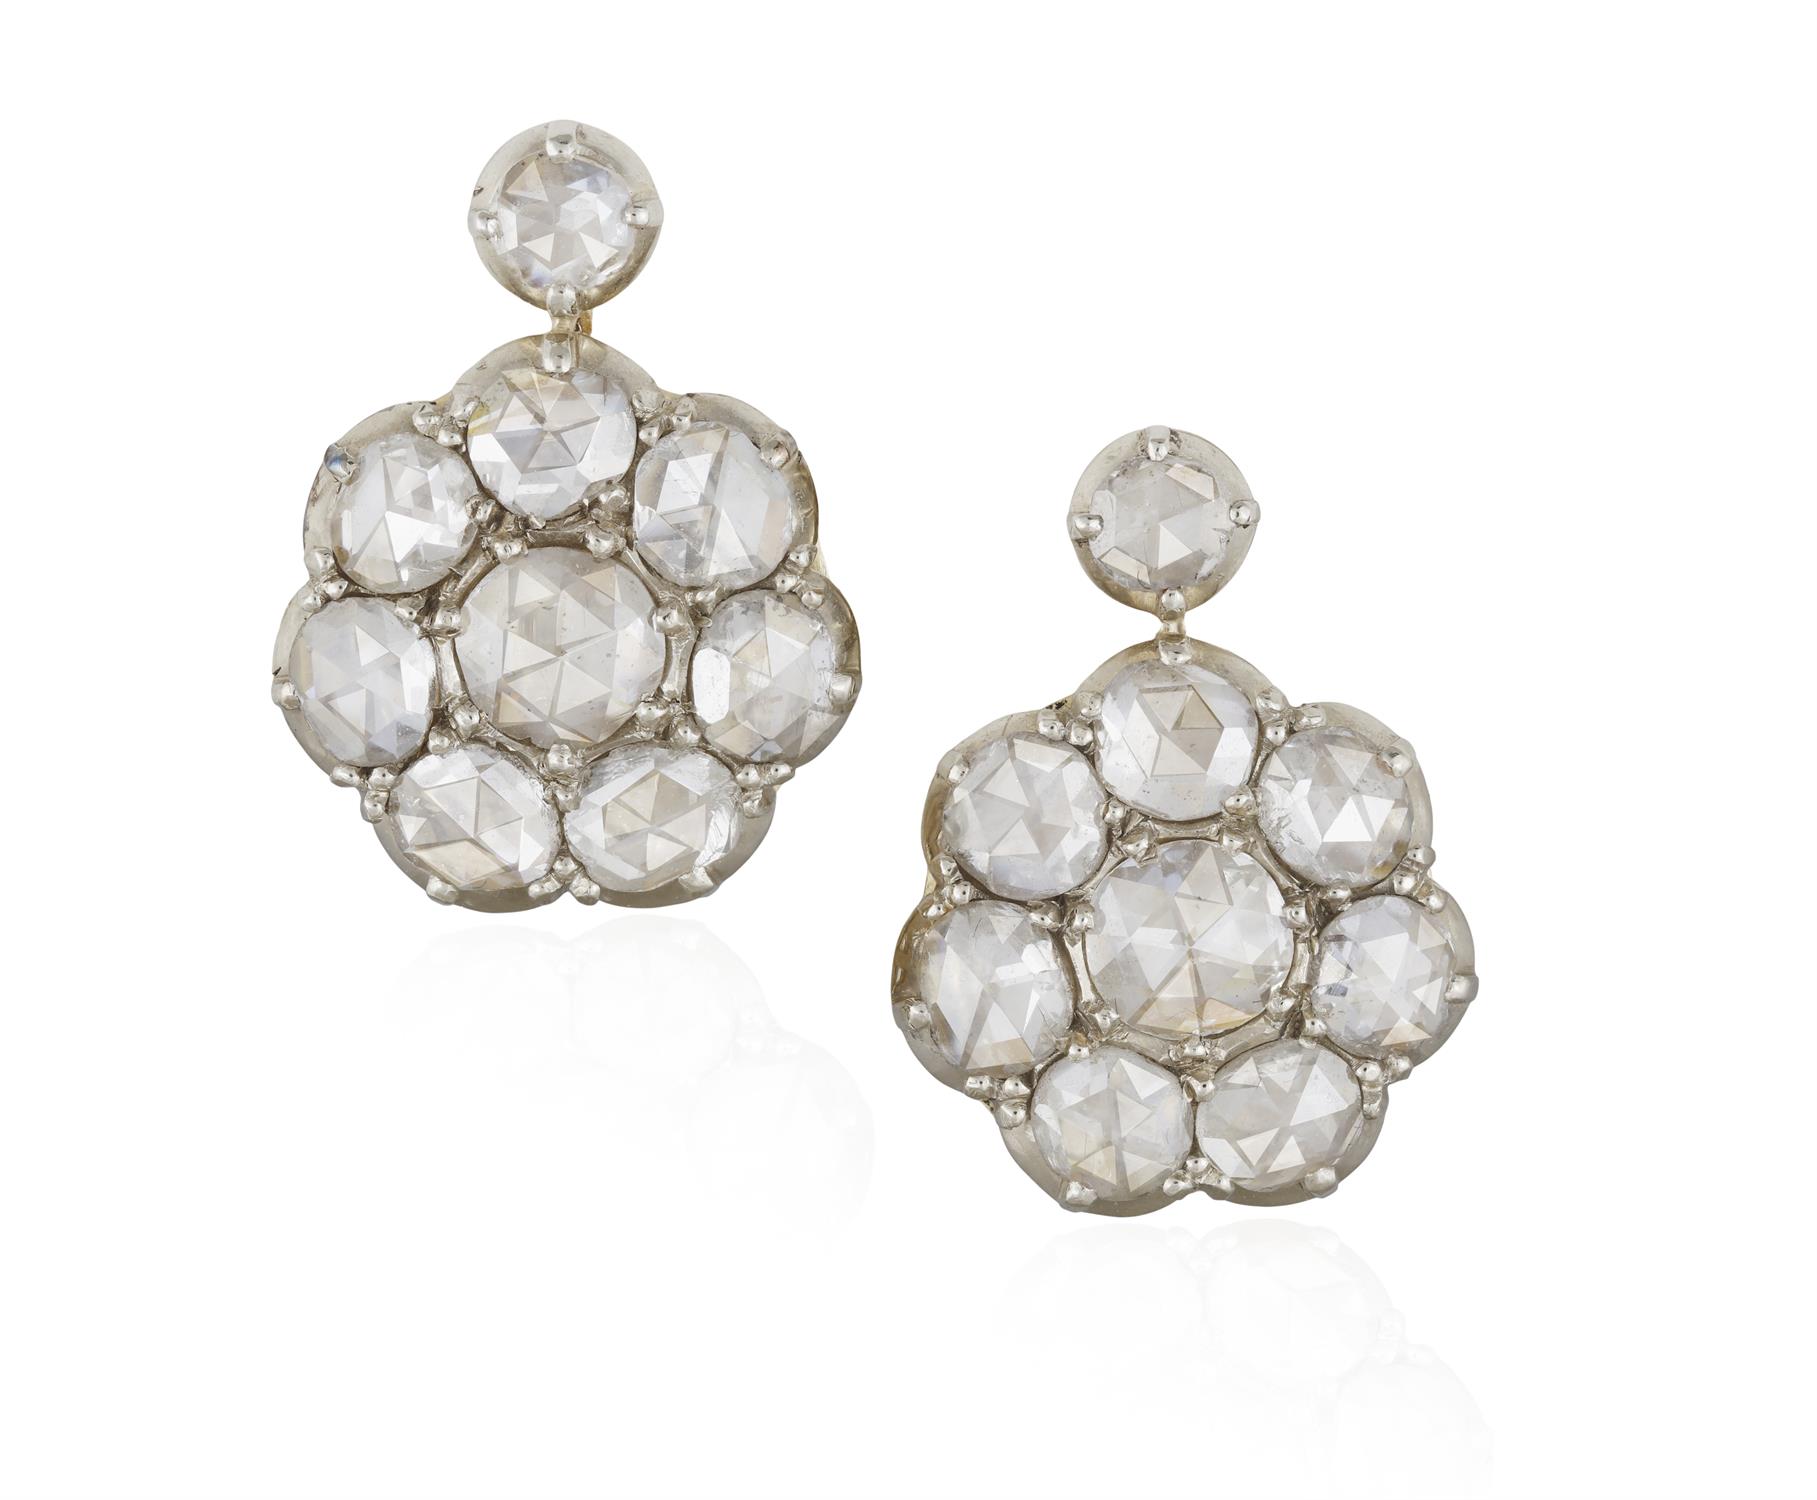 A PAIR OF DIAMOND EARRINGS Each composed of a rose-cut diamond cluster with similarly-cut